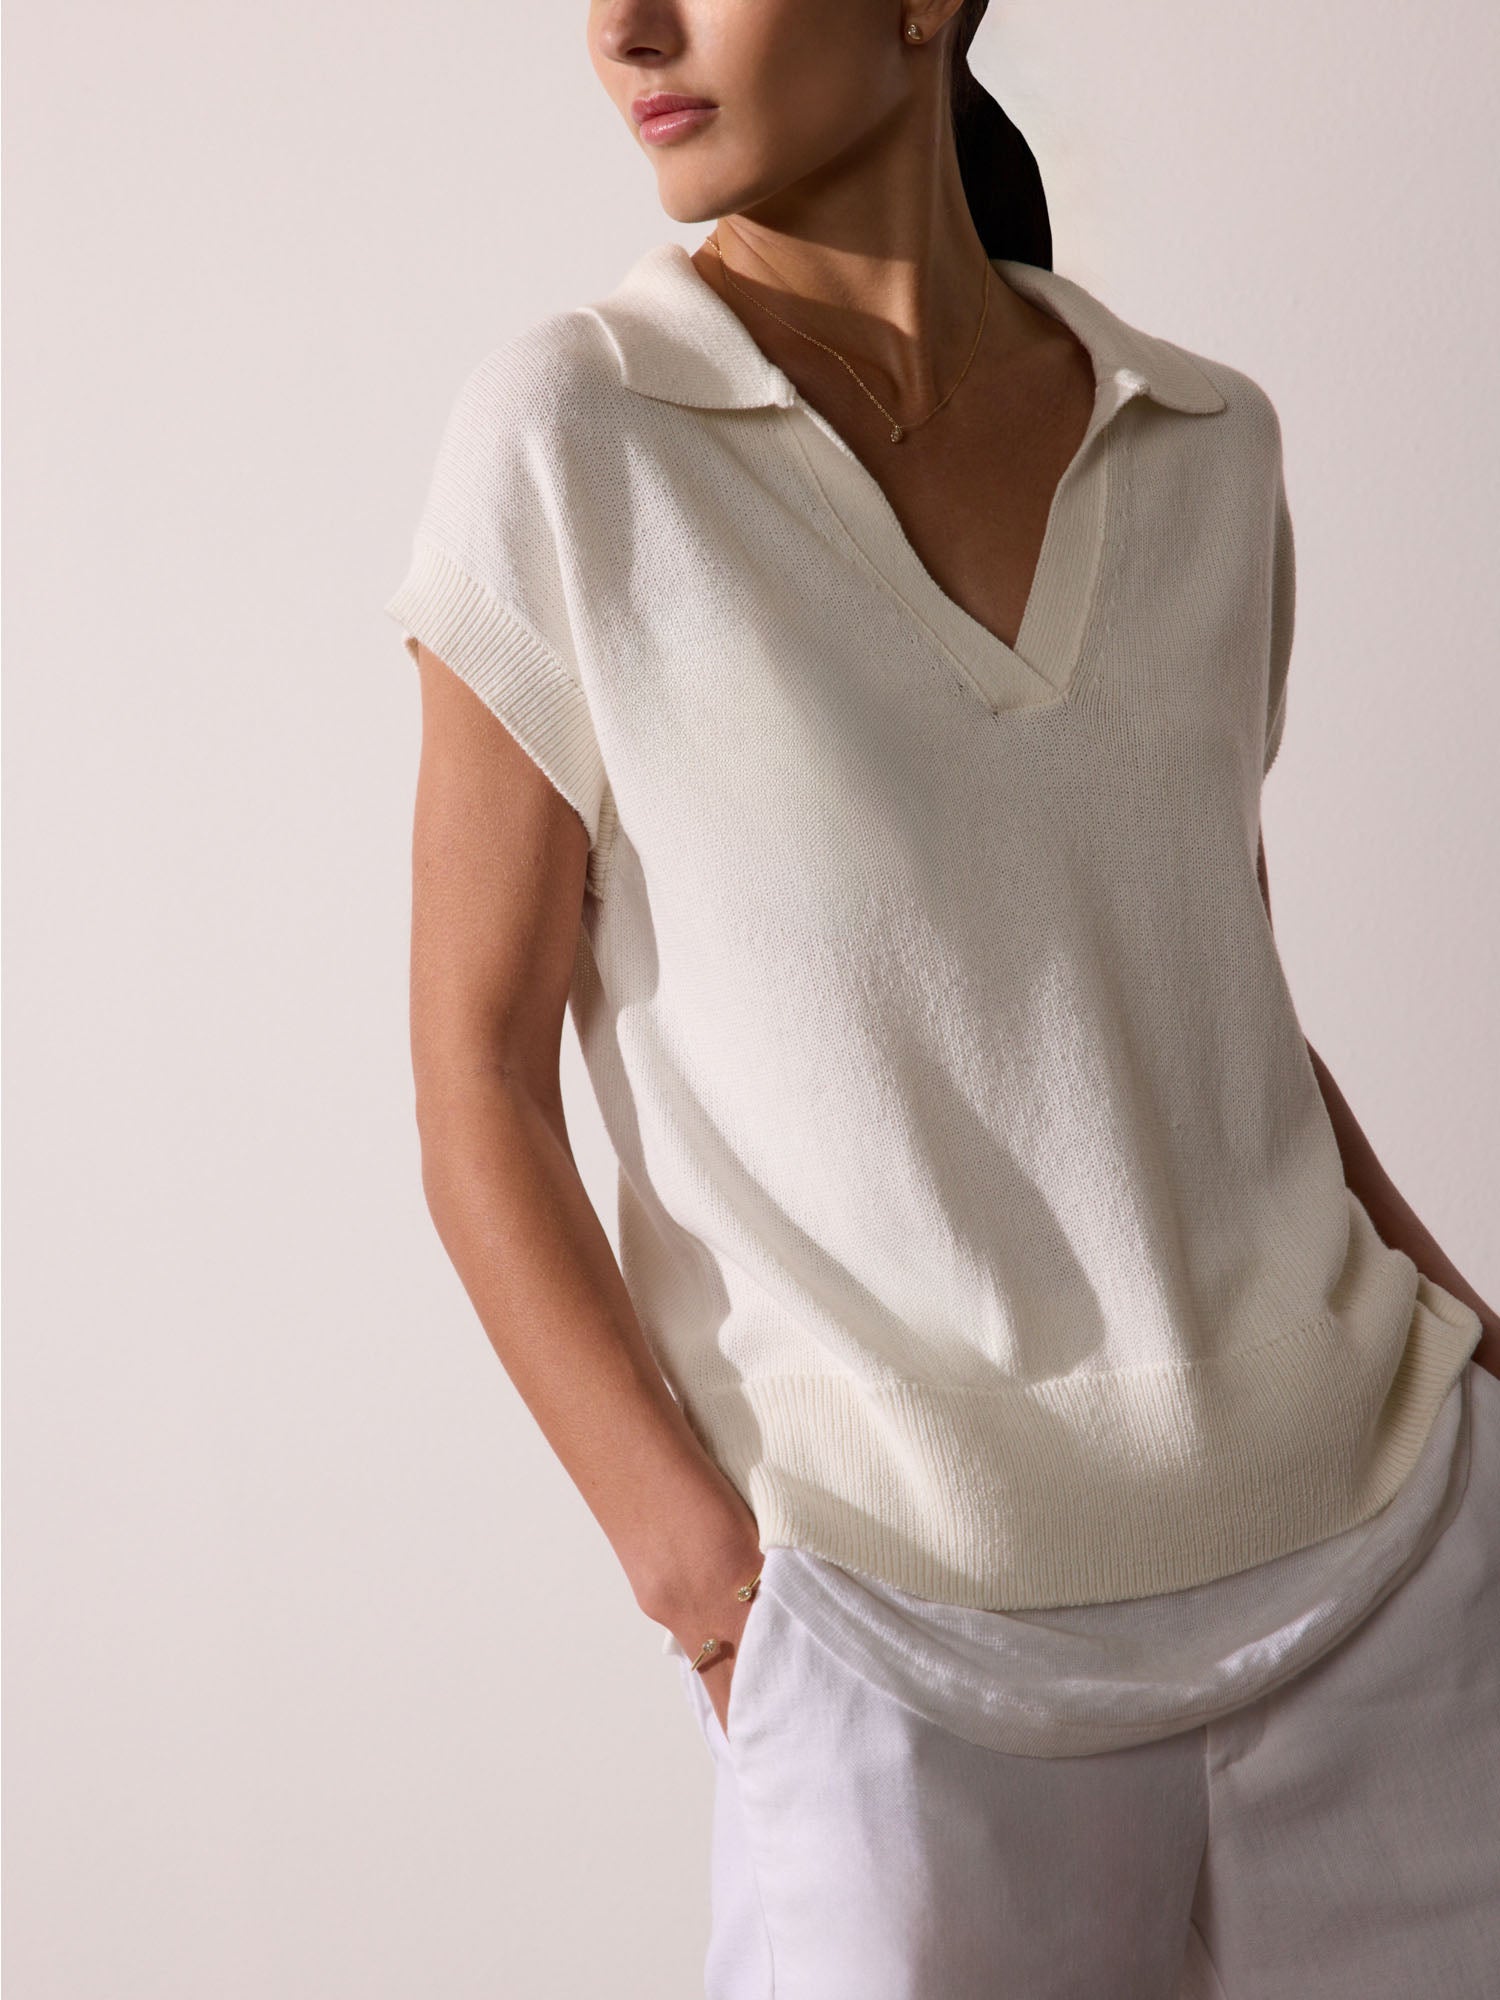 Jaia layered polo short sleeve white sweater front view 